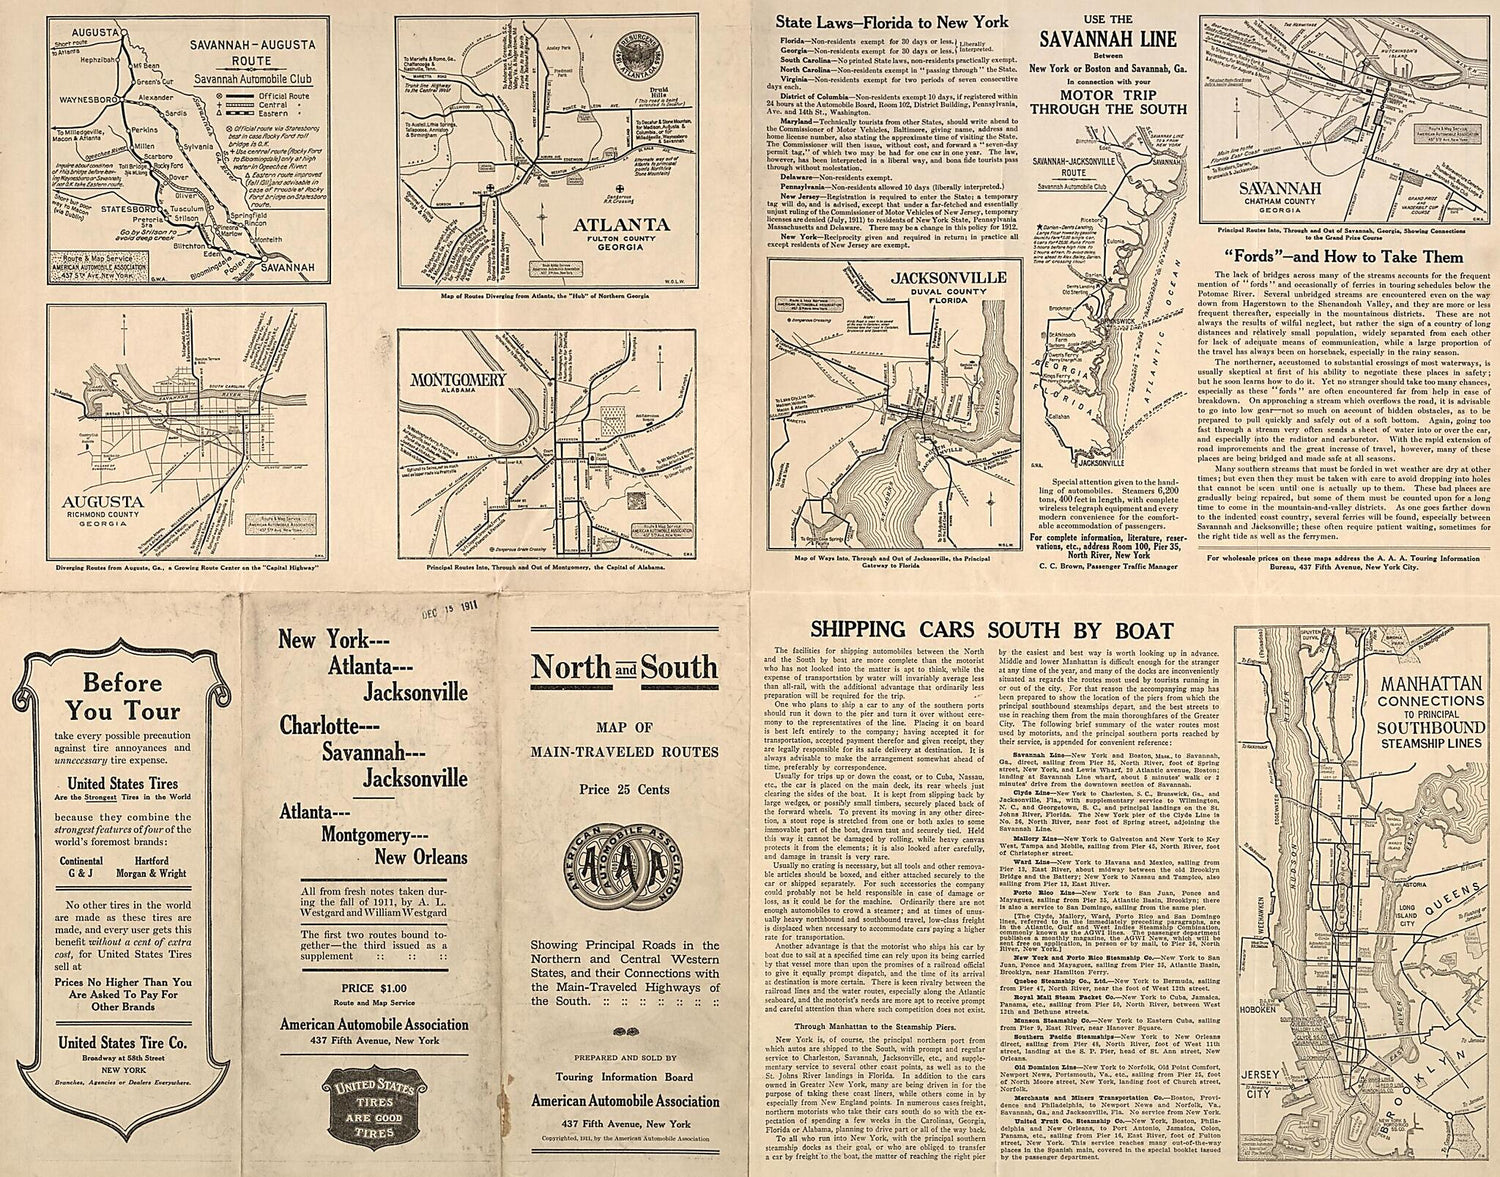 This old map of Traveled Routes : Showing Principal Roads In the Northern and Central Western States, and Their Connections With the Main-traveled Highways of the South : Eastern U.S. (Routes Between the Northern States, Middle Western States, and the So